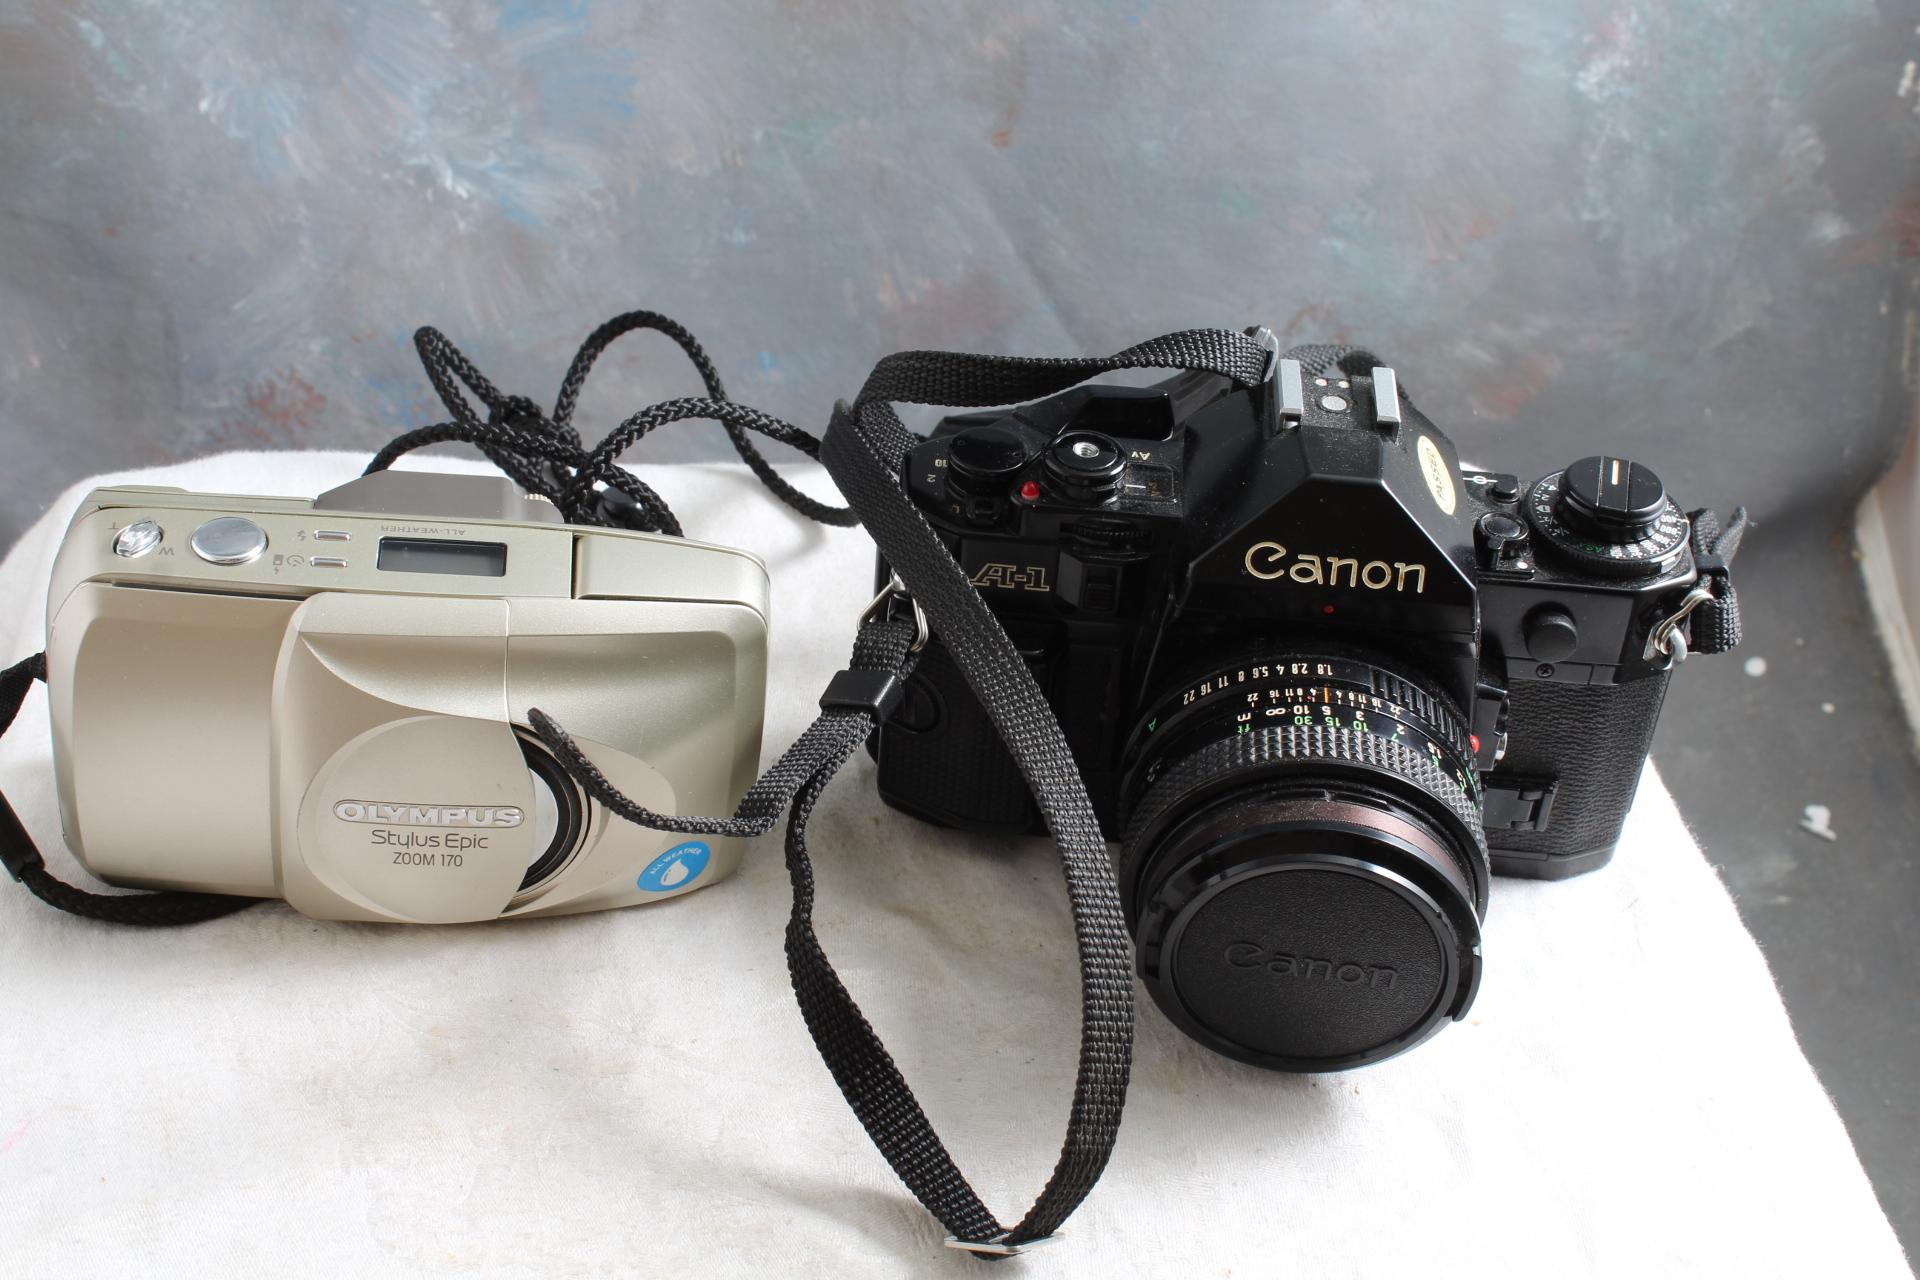 2 Vintage Cameras CANON A-1 SLR with 50mm Canon Lens & Olympus Stylus